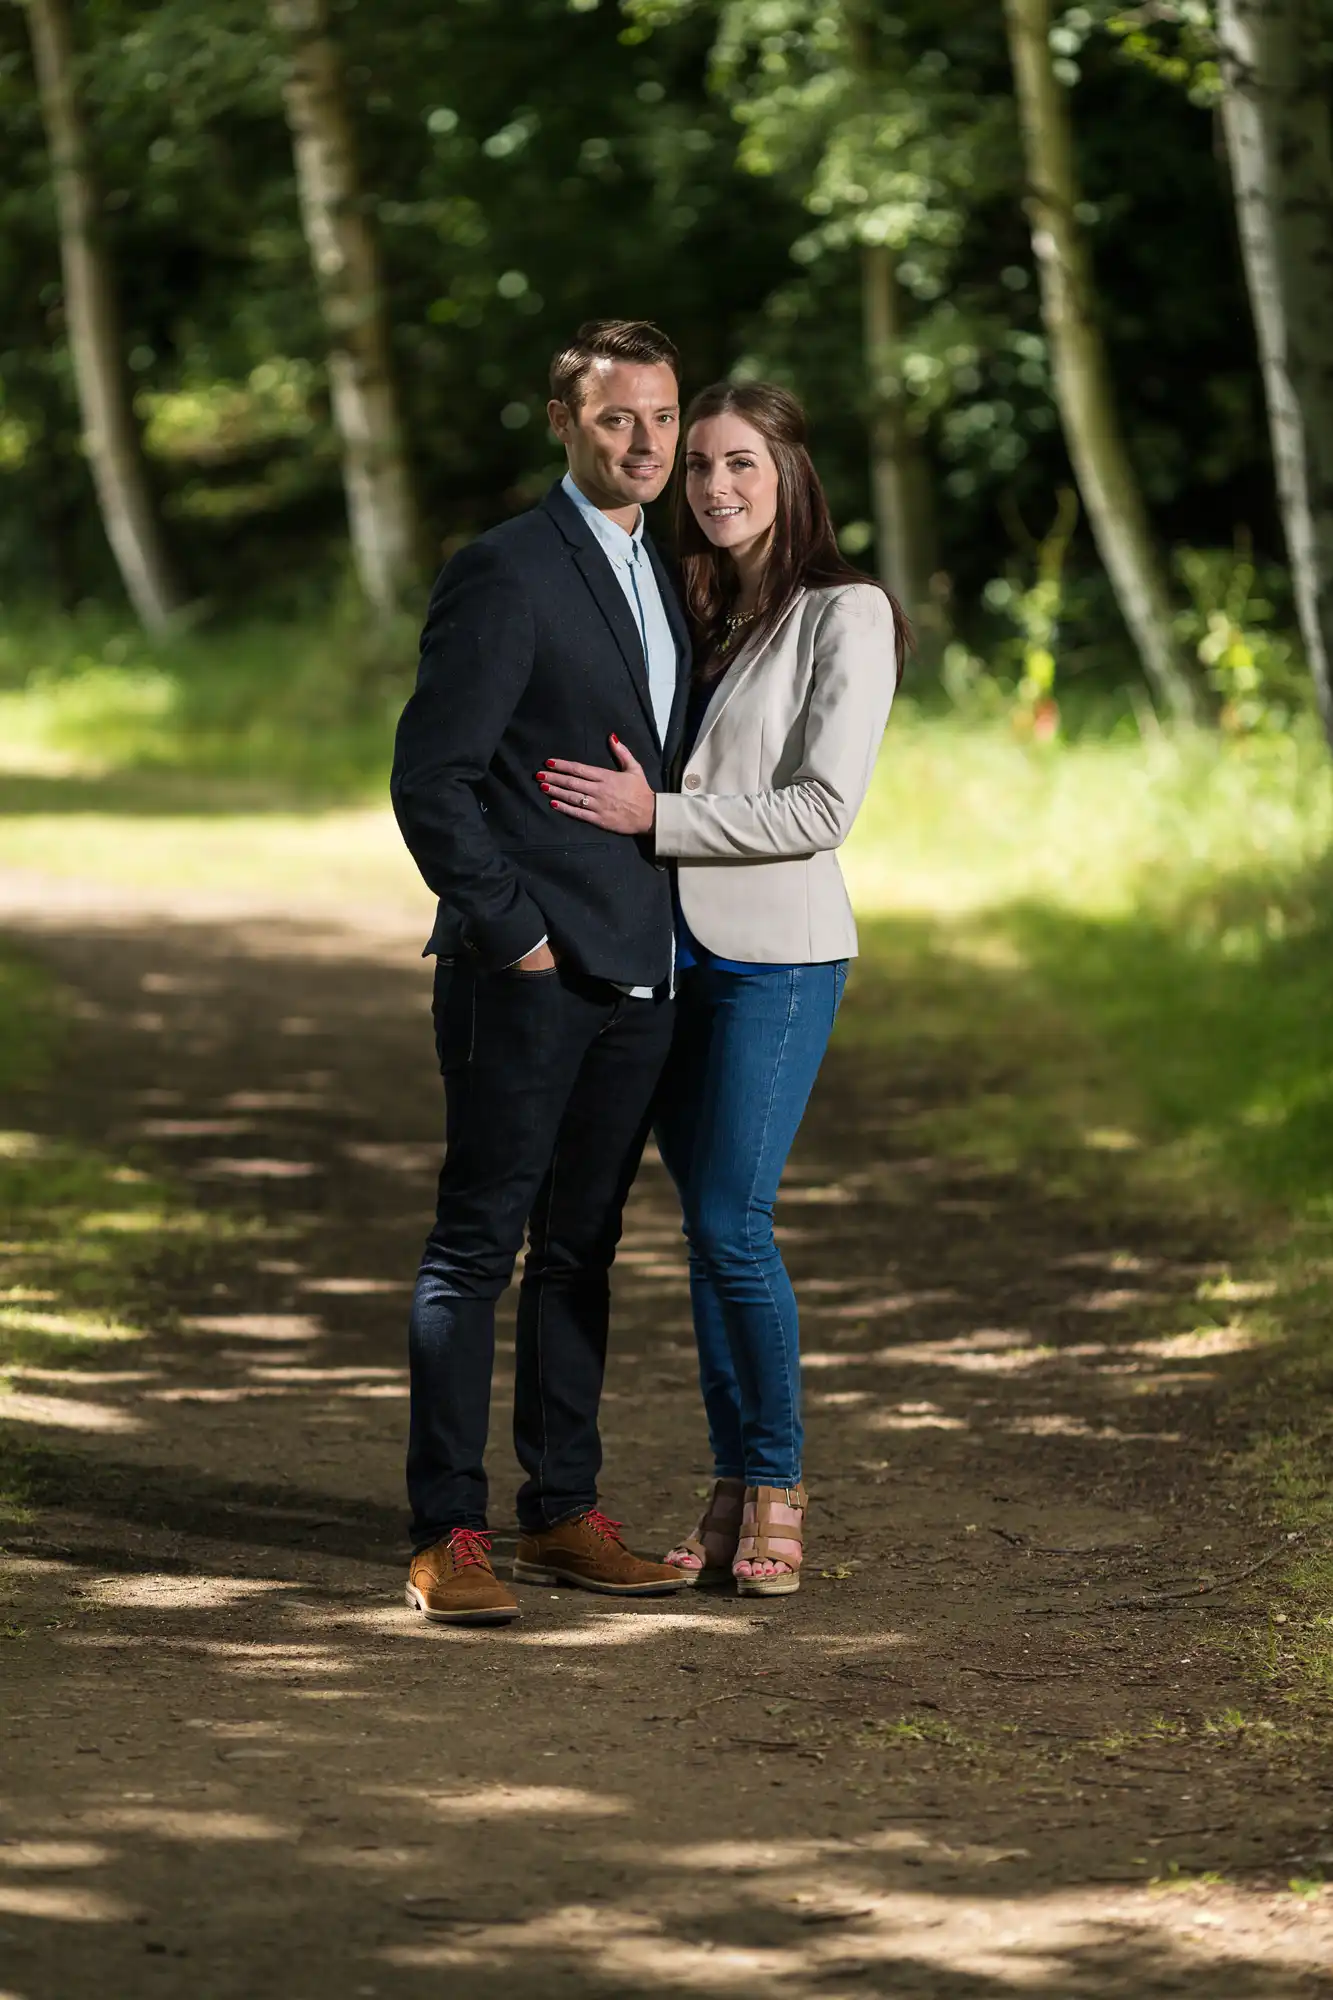 A couple embracing on a forest path, with the man in a blazer and jeans, and the woman in a blazer and blue jeans, both smiling at the camera.